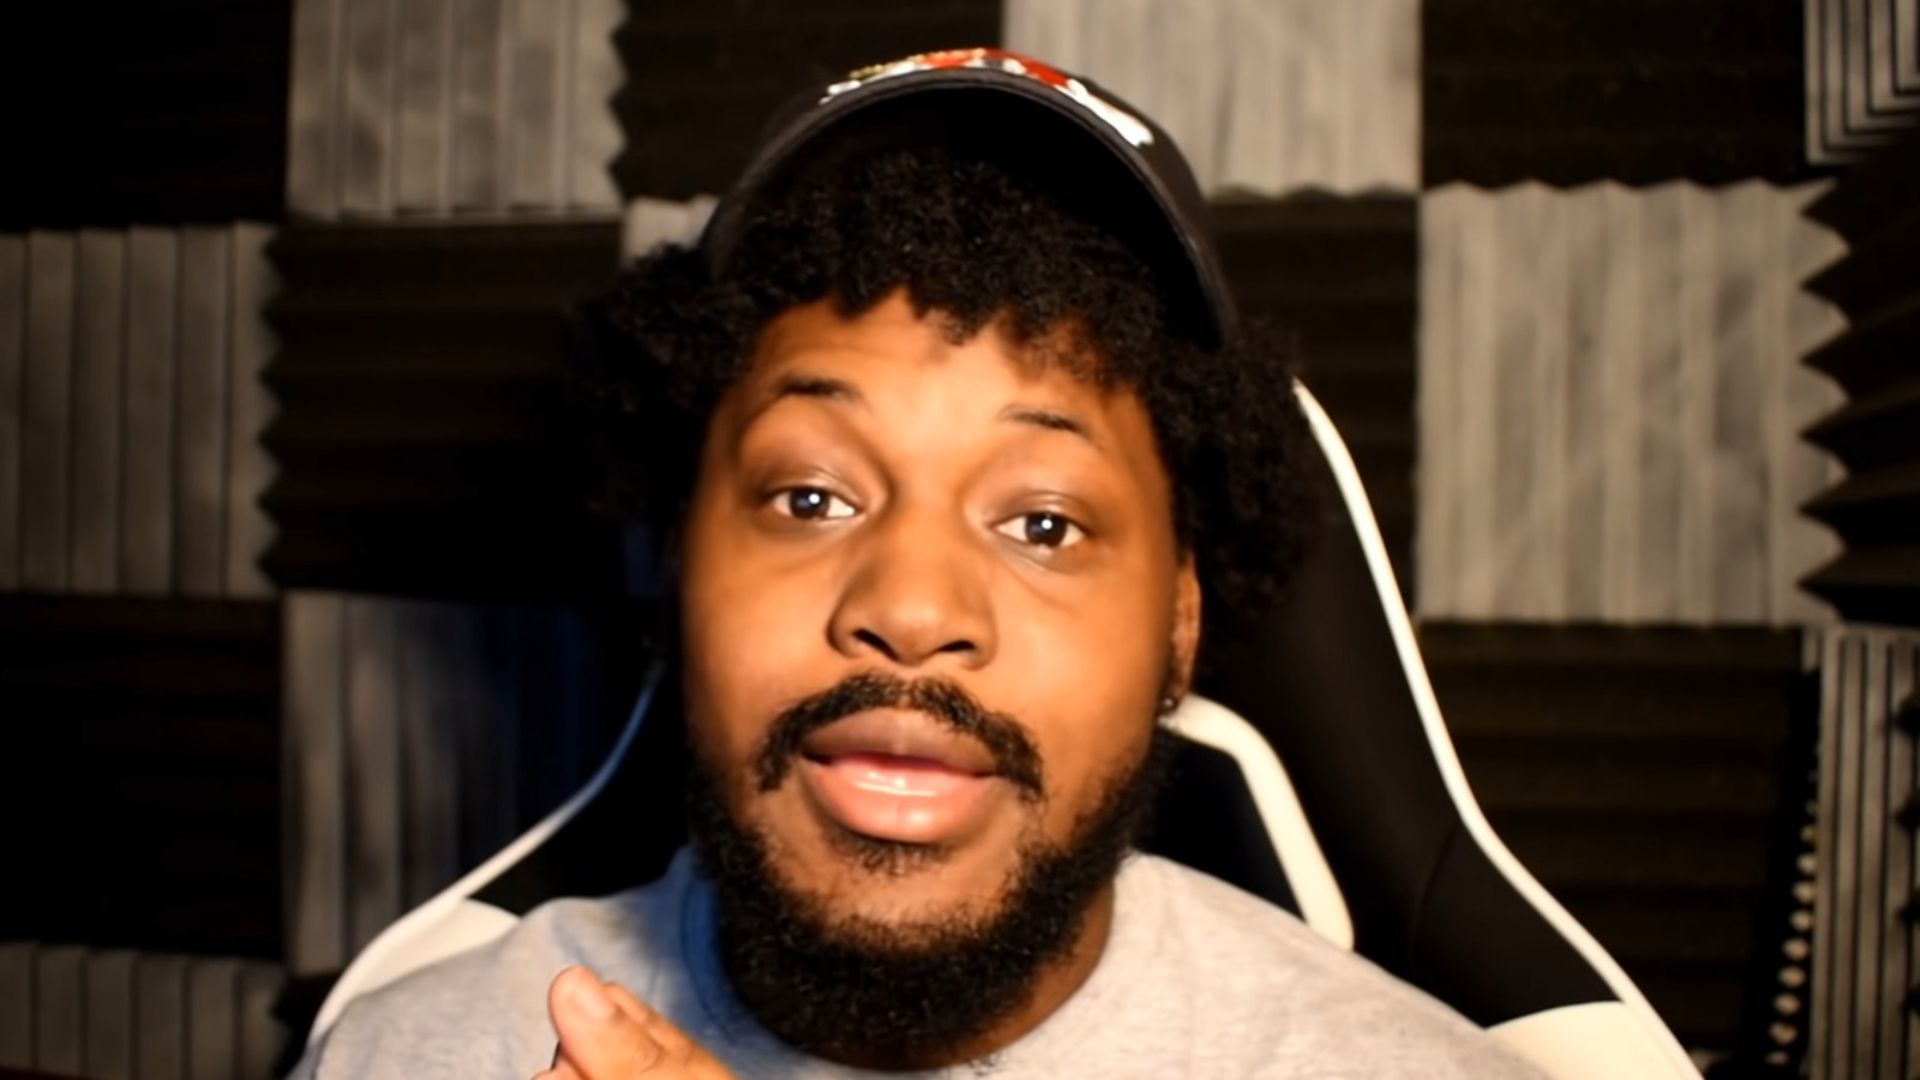 Coryxkenshin Net Worth - An American Gaming YouTuber And Social Media Influencer